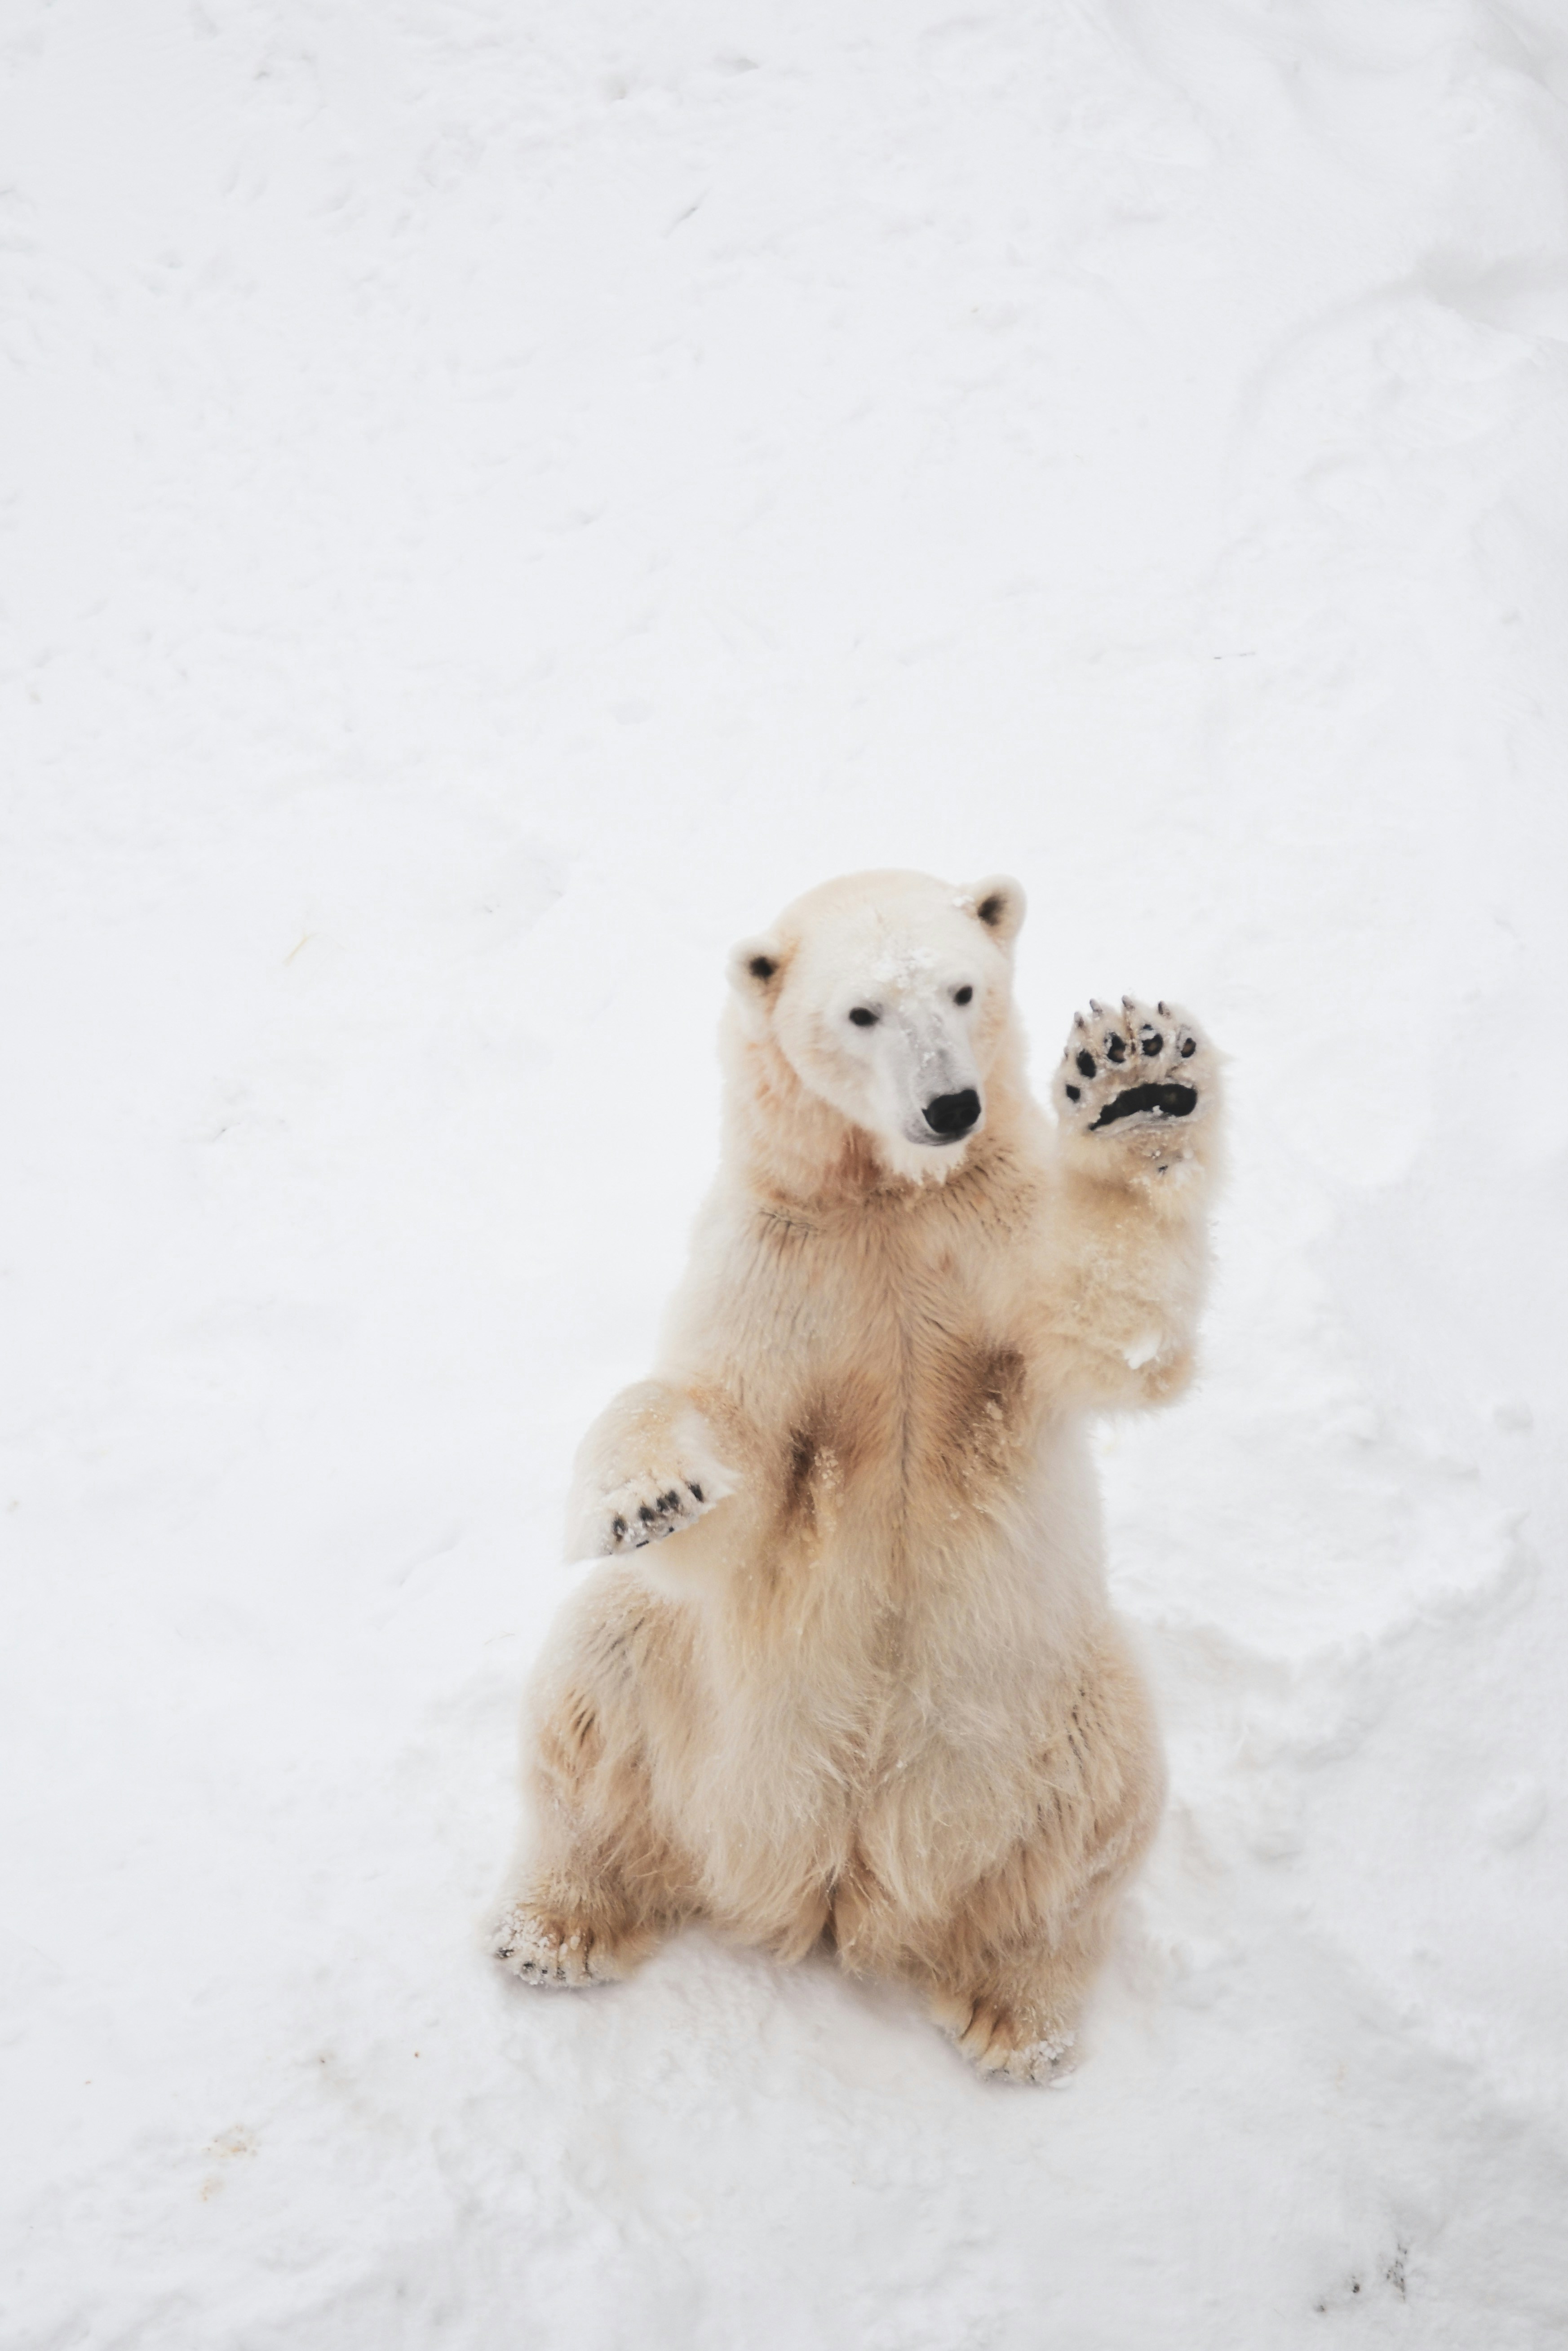 350+ Polar Bear Pictures | Download